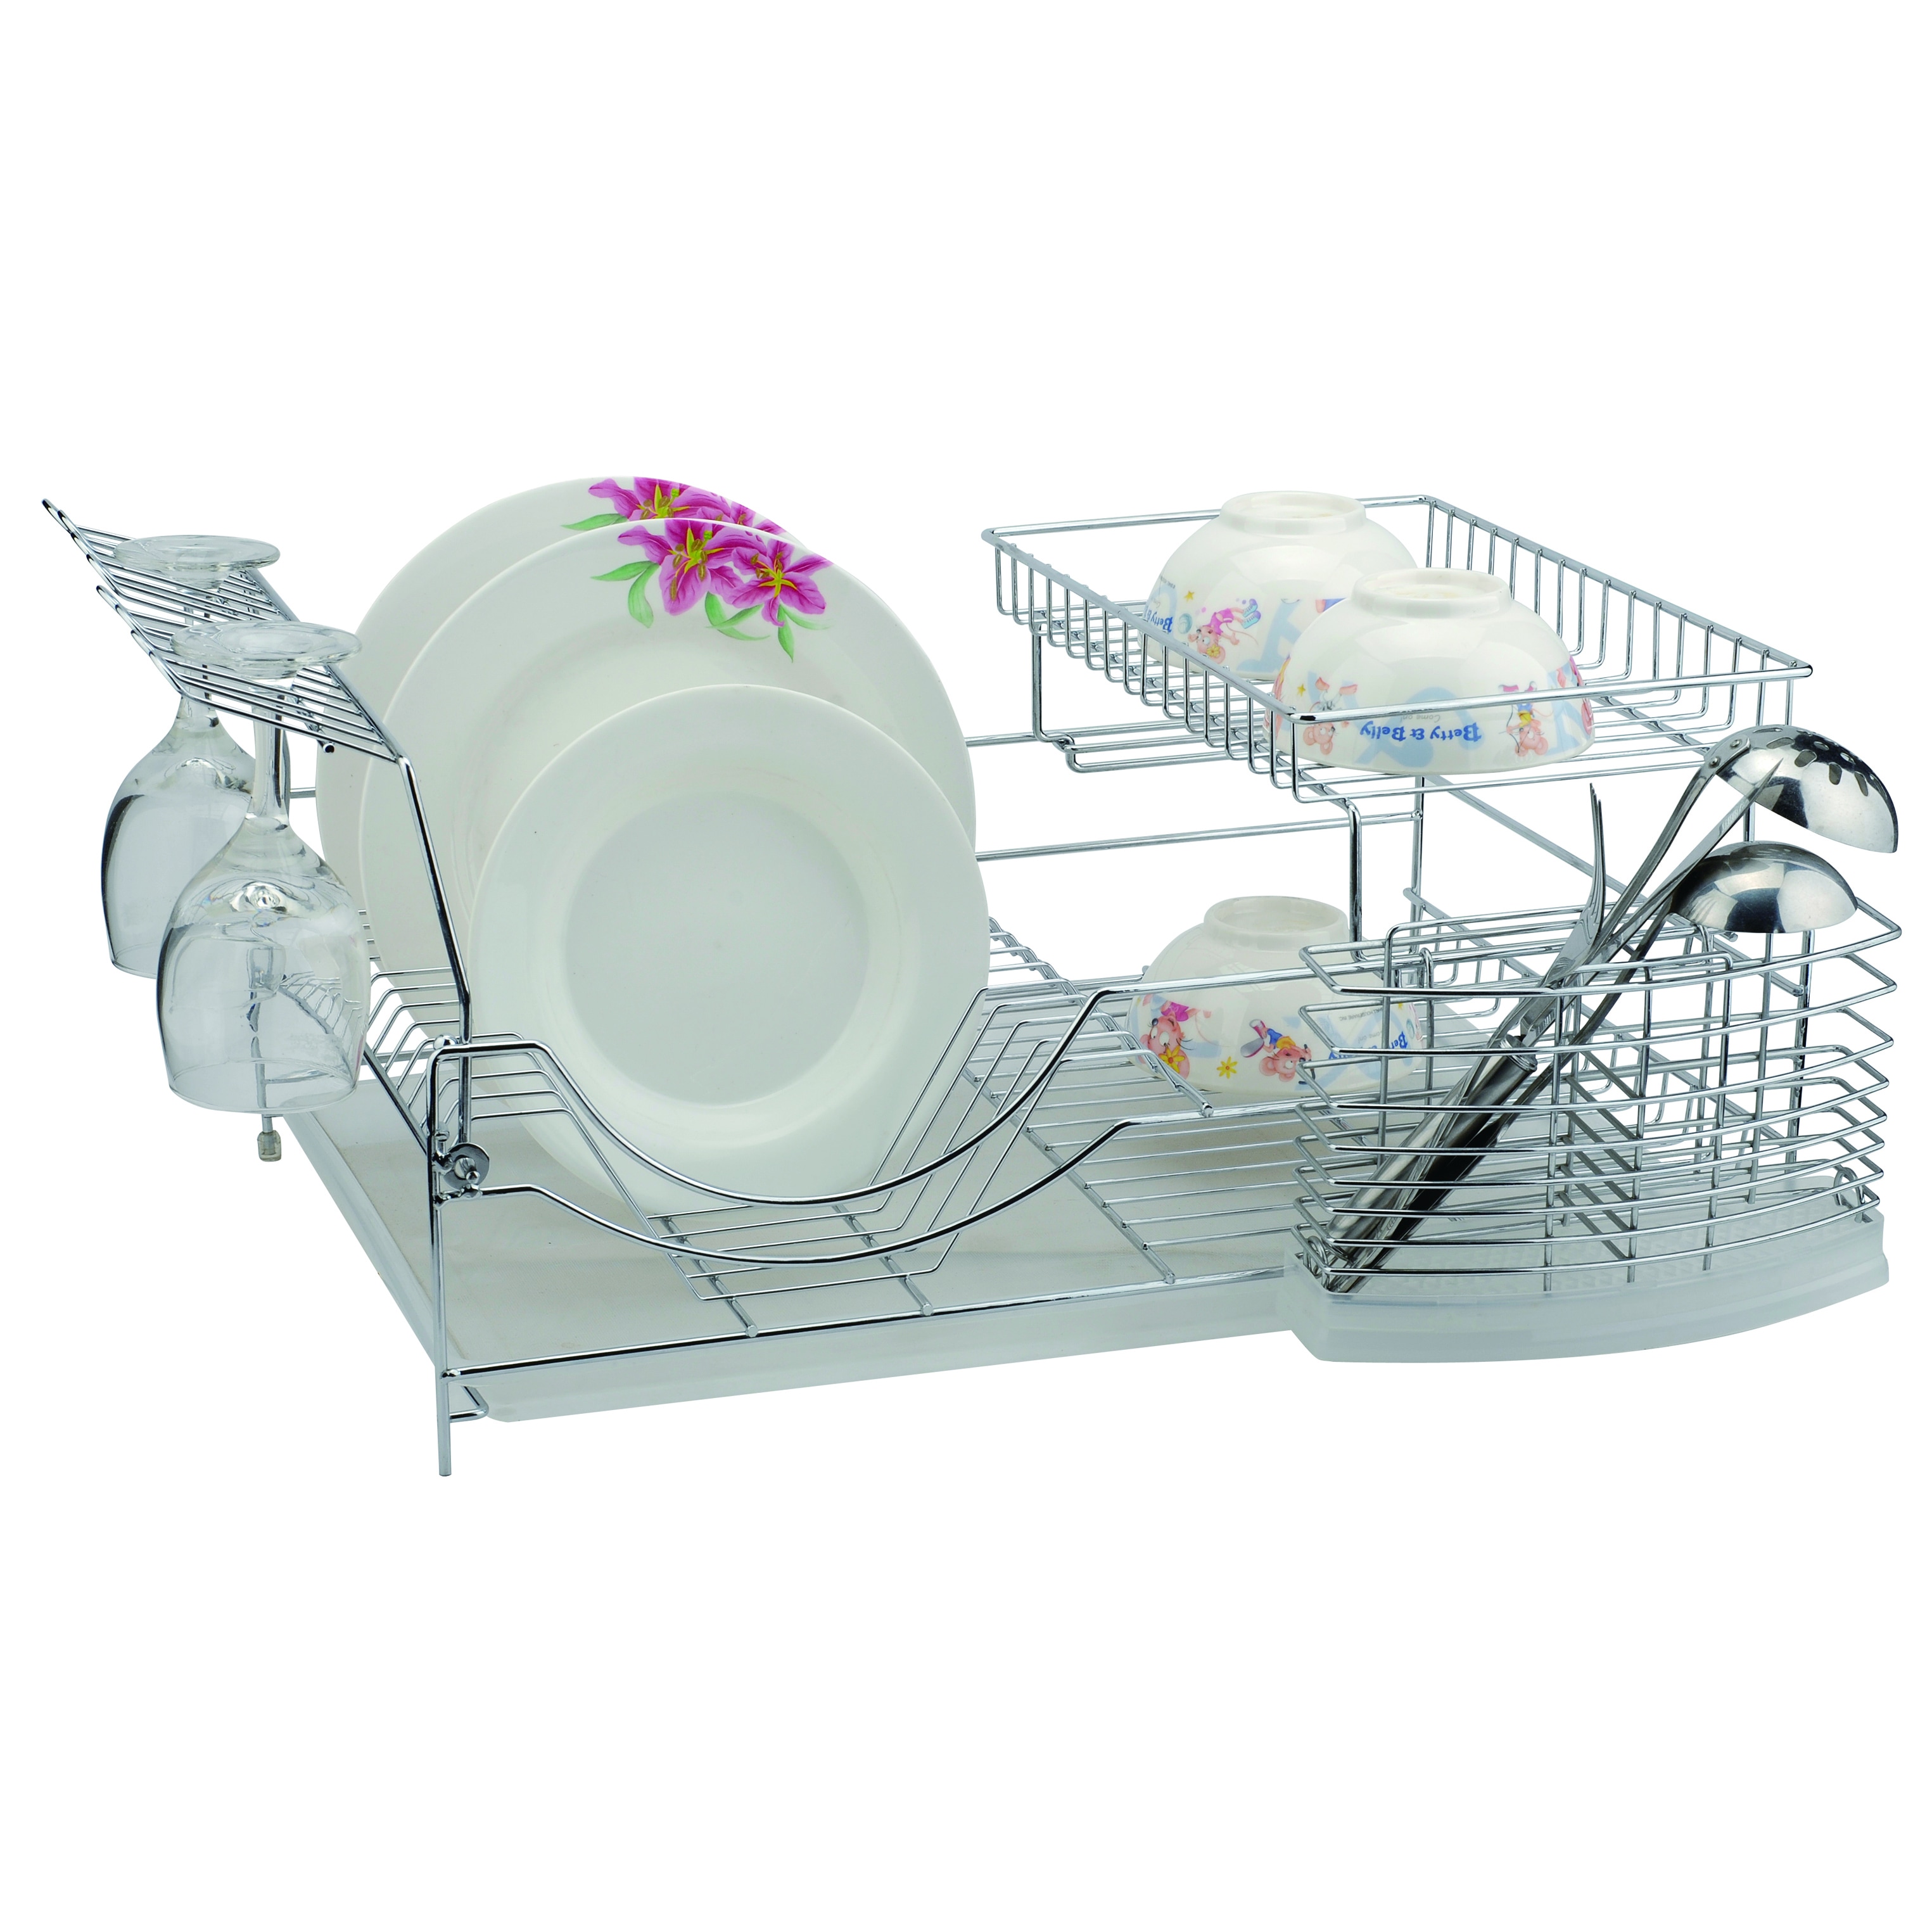 Better Chef 16 Inch Chrome Dish Rack with Black Draining Tray